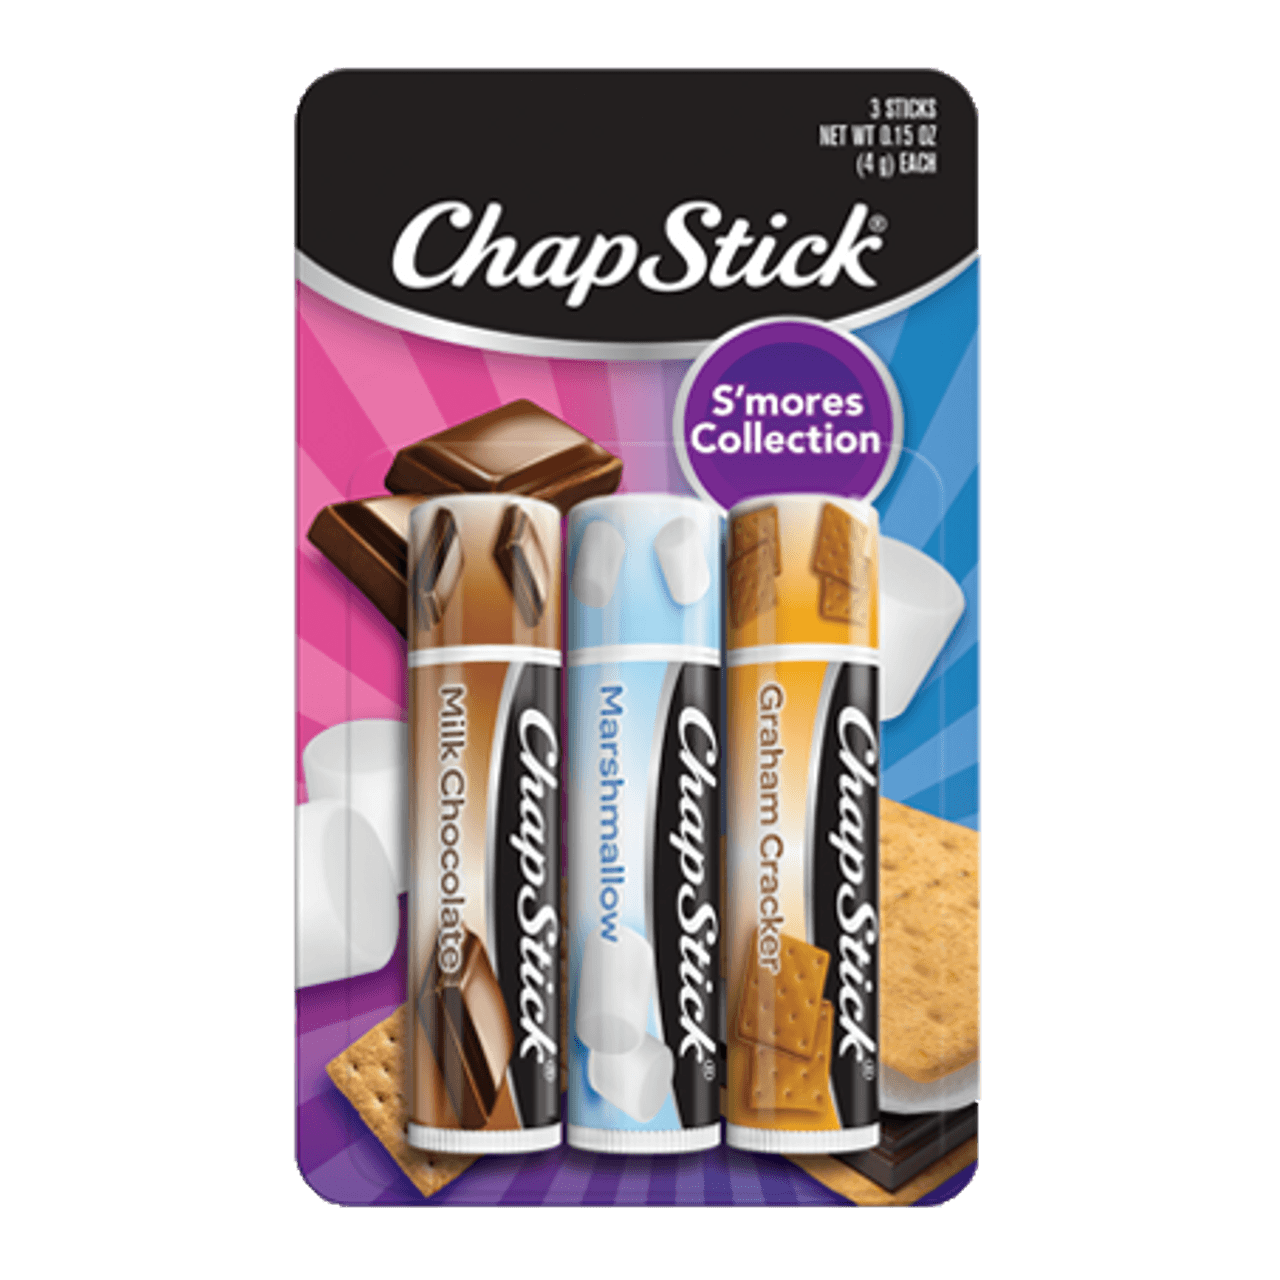 ChapStick® S'mores Collection three pack with Milk Chocolate, Marshmallow, Graham Cracker flavors.